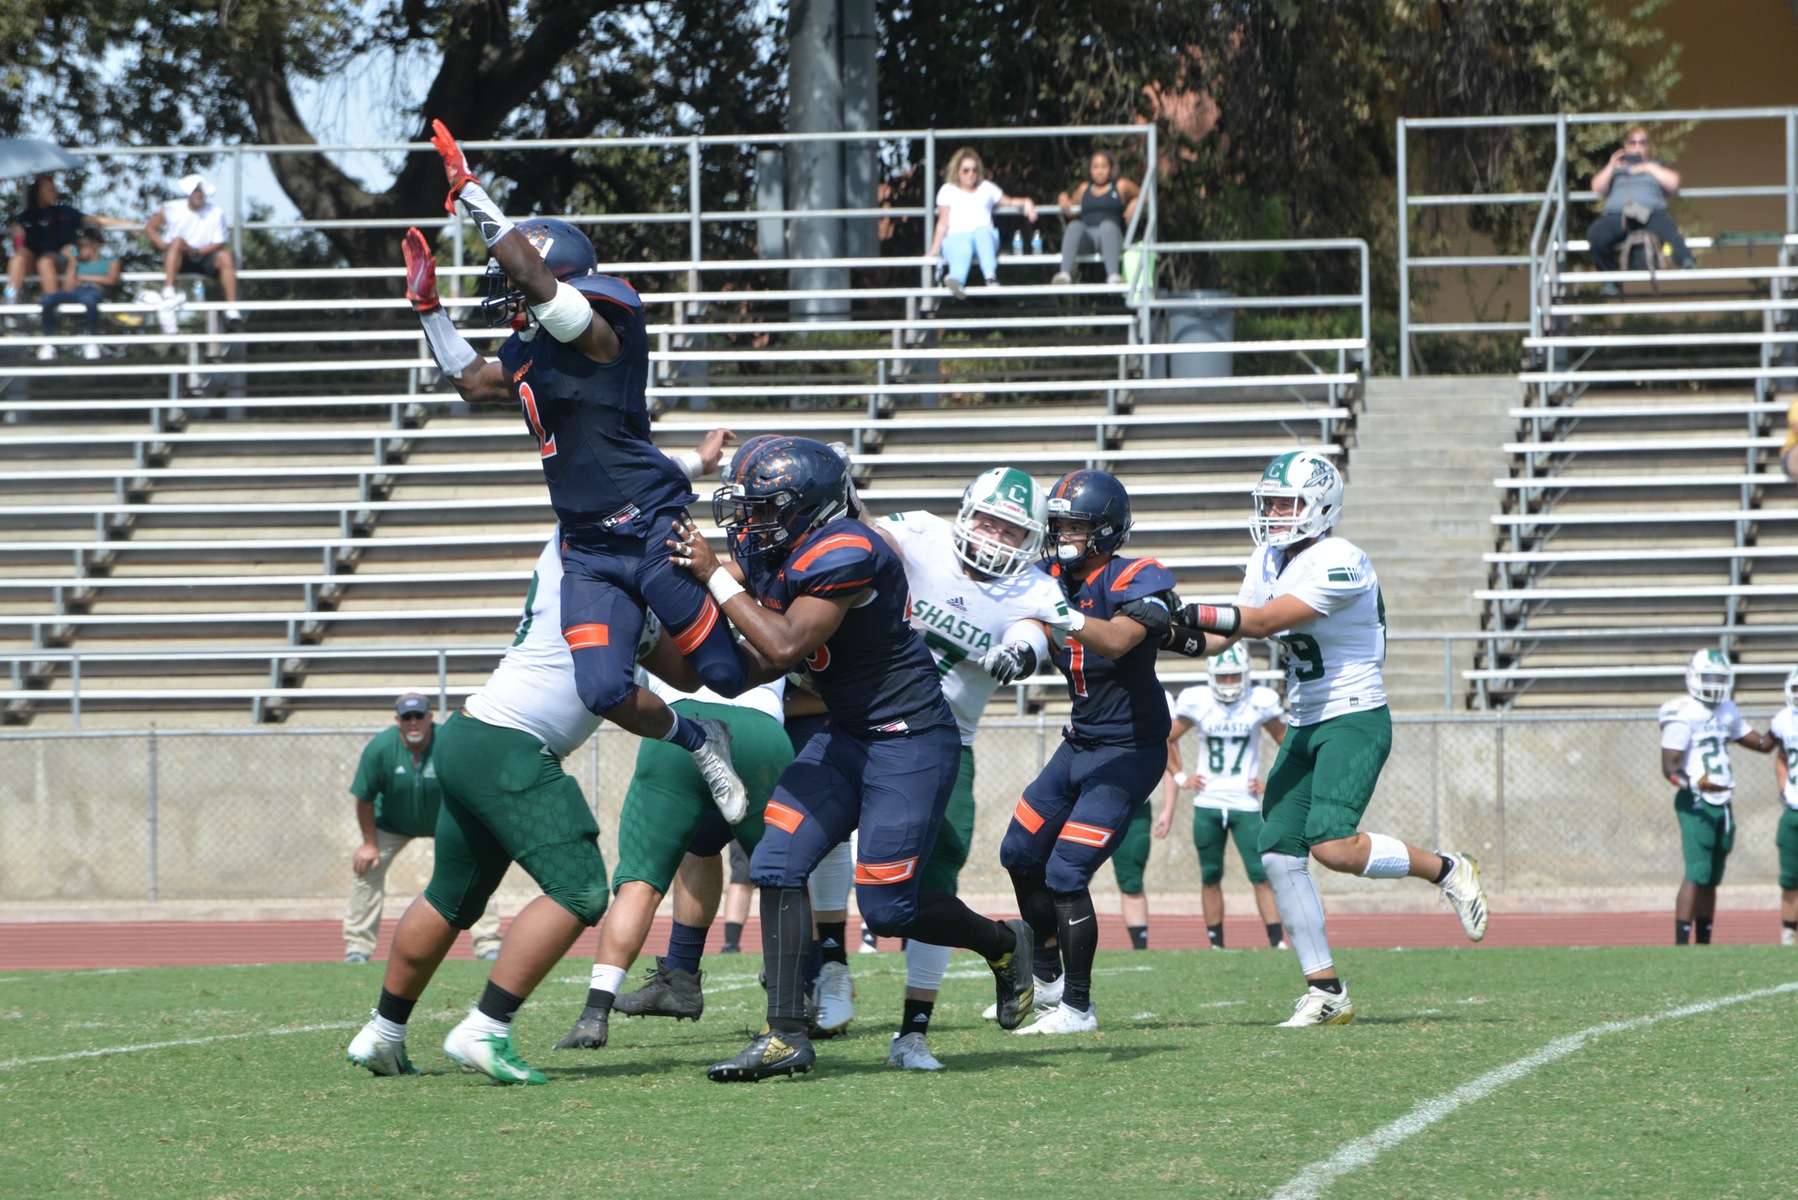 Bobby Peele goes for a blocked pass.